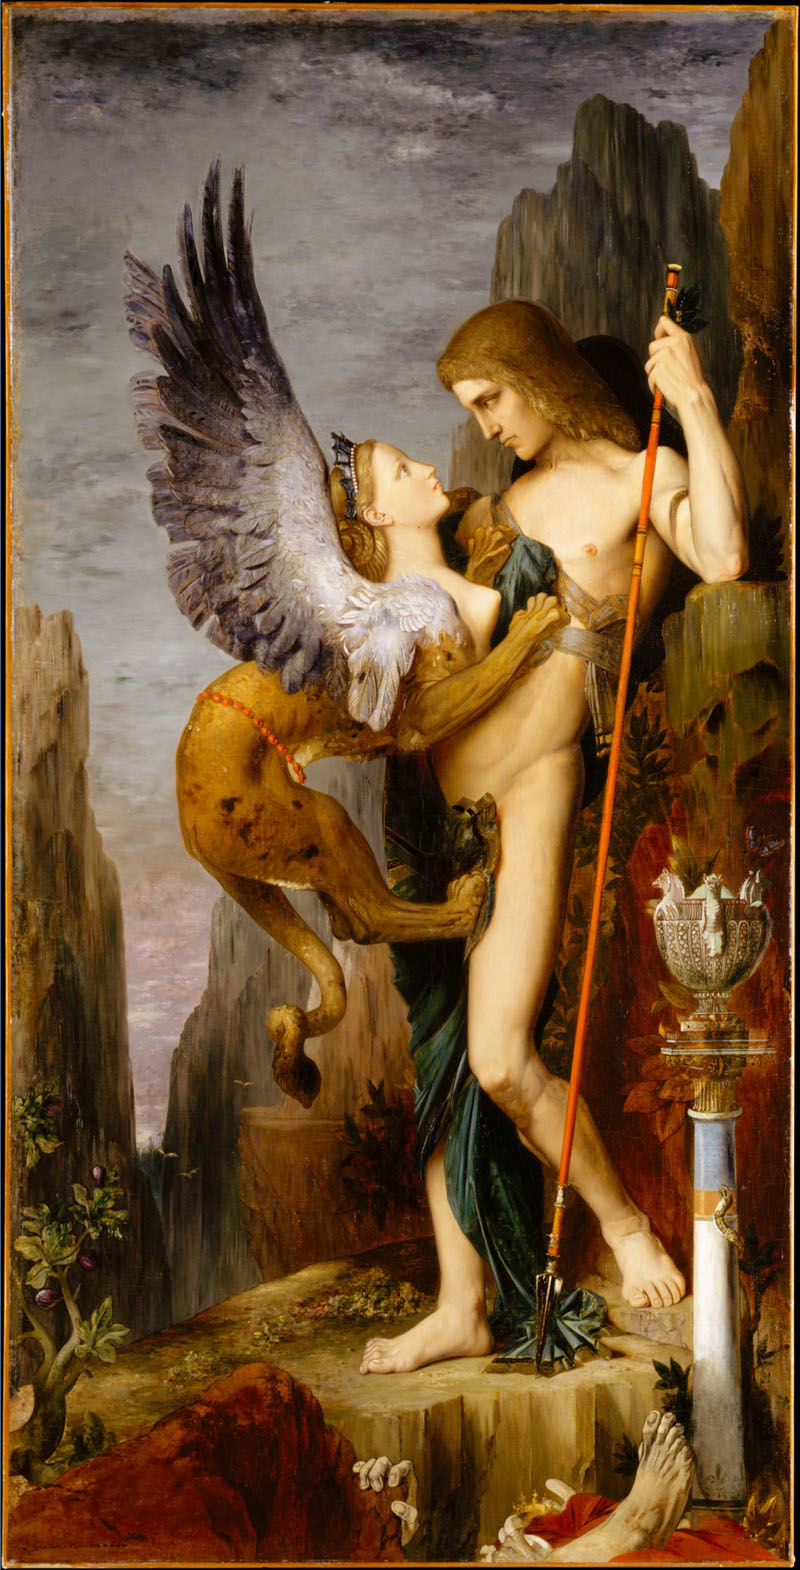 Oedipus complex: Oedipus and the Sphinx, by Gustave Moreau, 1864.